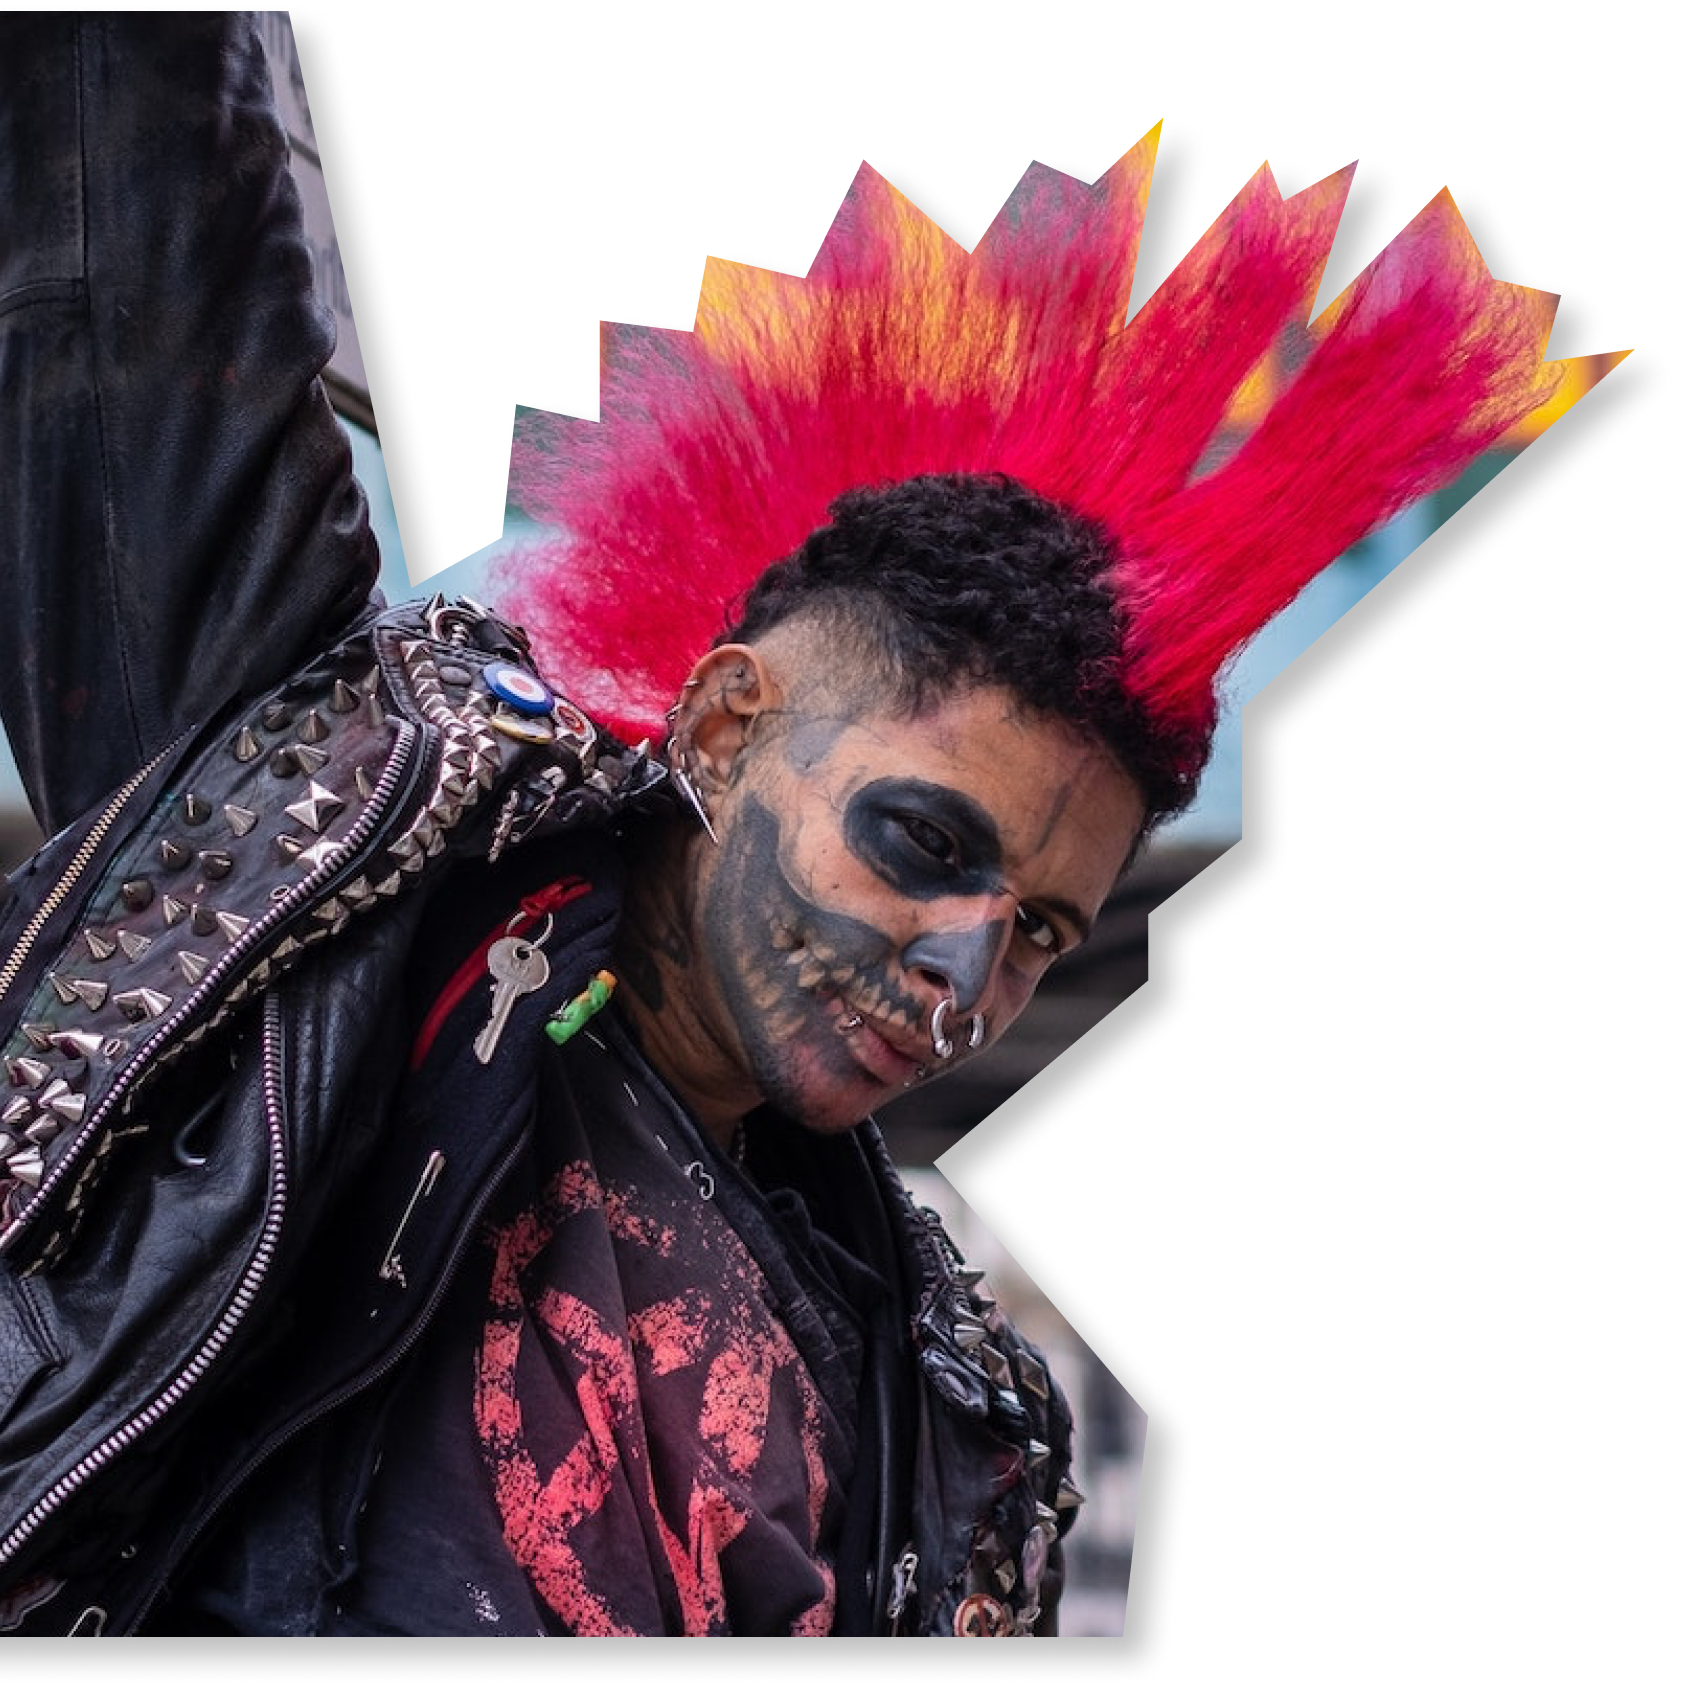 An anarchist punk with a vibrant magenta mohawk, face tattoos, and modified jacket. His shirt has the anarchist circle-A symbol.